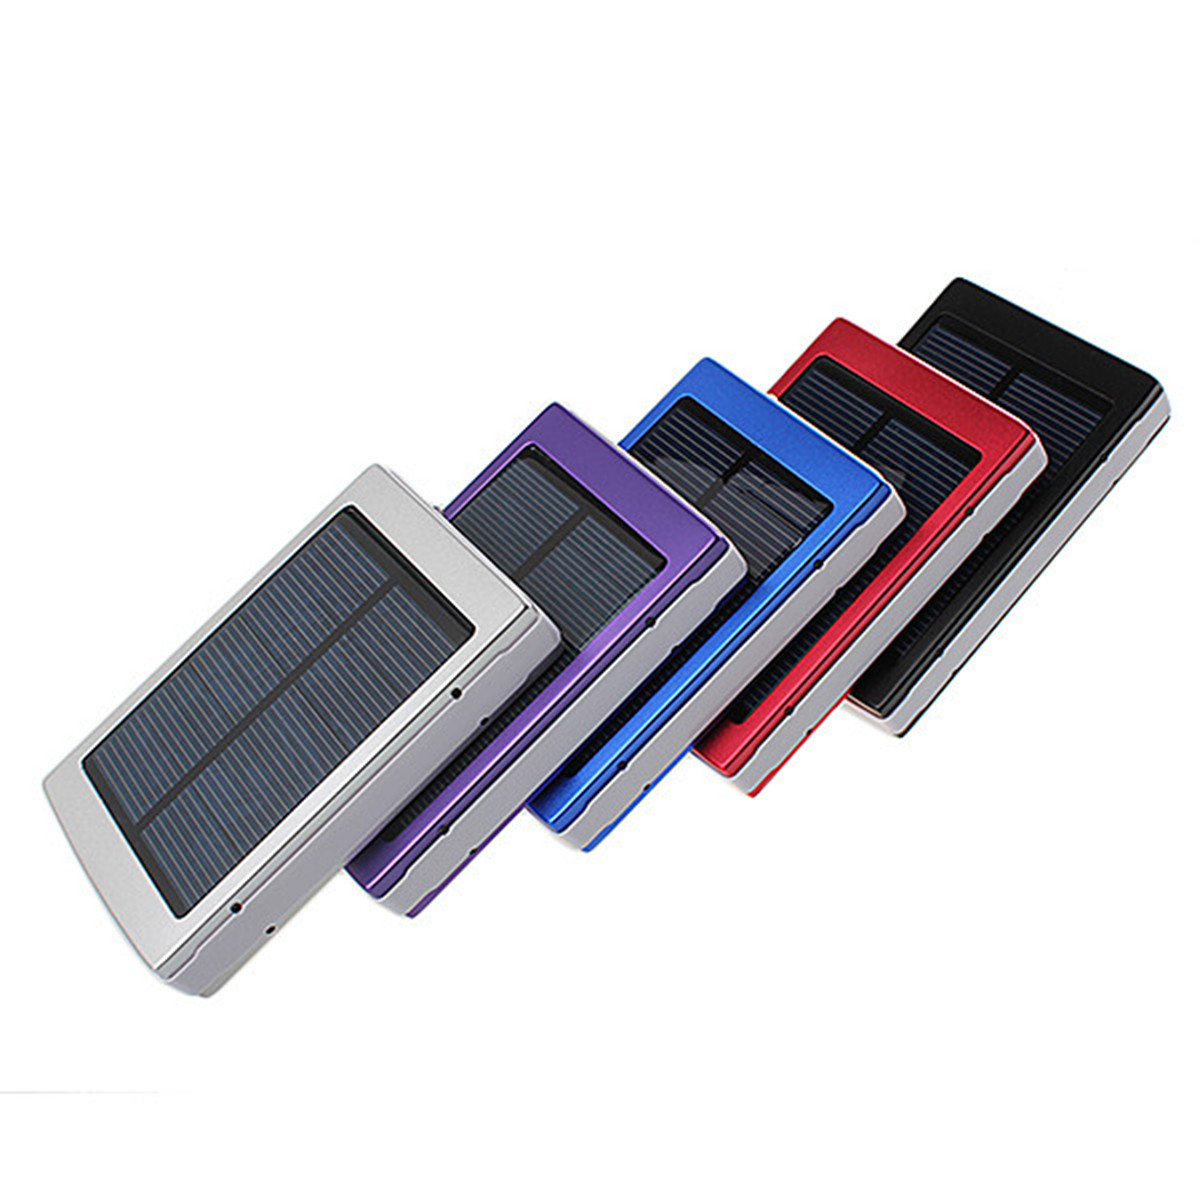 Portable-Solar-Panel-Dual-USB-External-Mobile-Battery-Power-Bank-Pack-Charger-for-iPhone-HTC-1419461-1